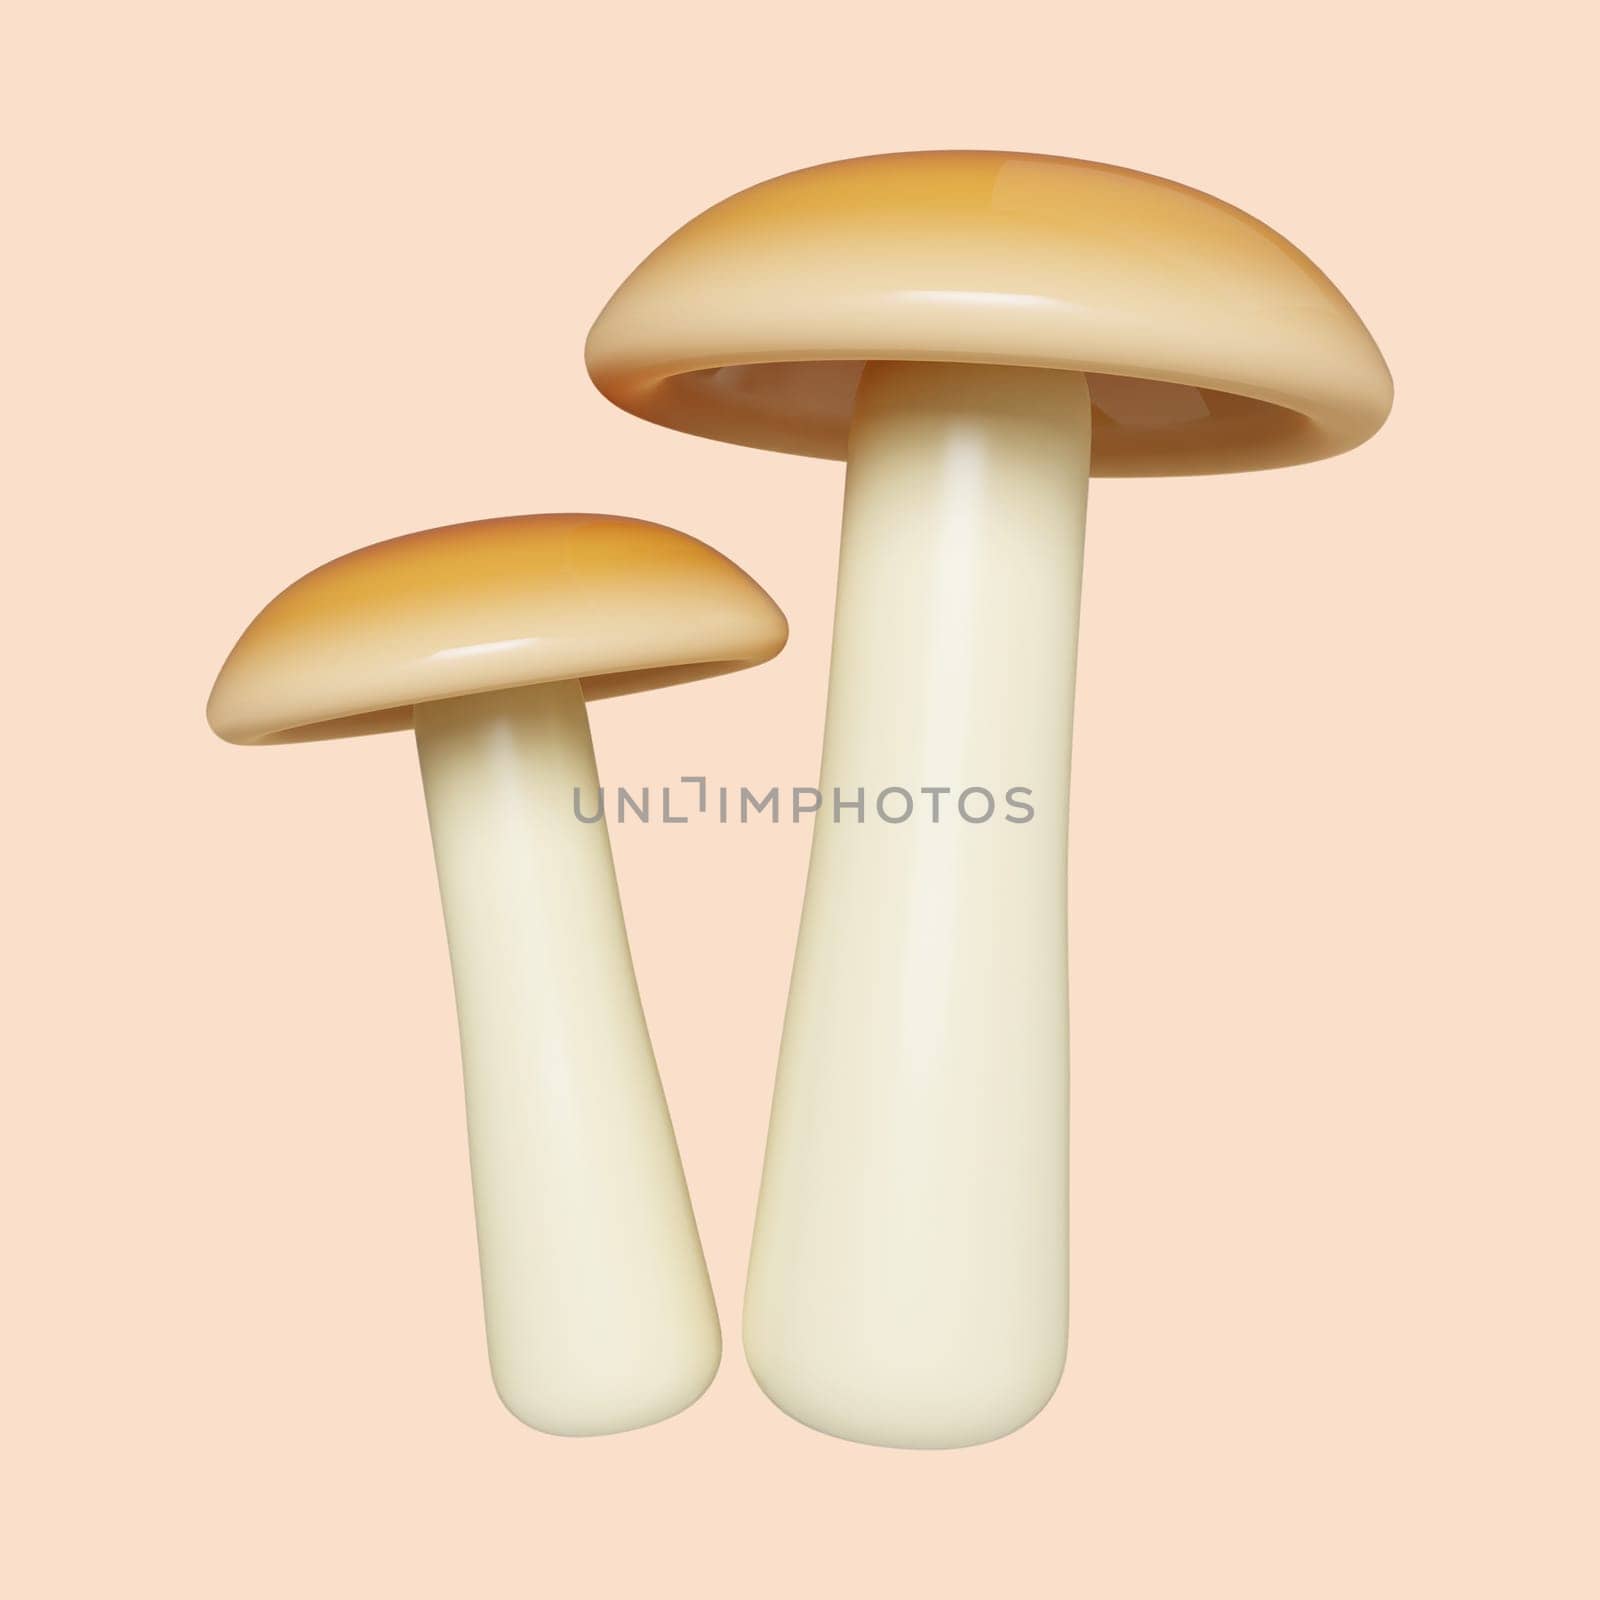 3d Autumn mushroom. Golden fall. Season decoration. icon isolated on gray background. 3d rendering illustration. Clipping path. by meepiangraphic